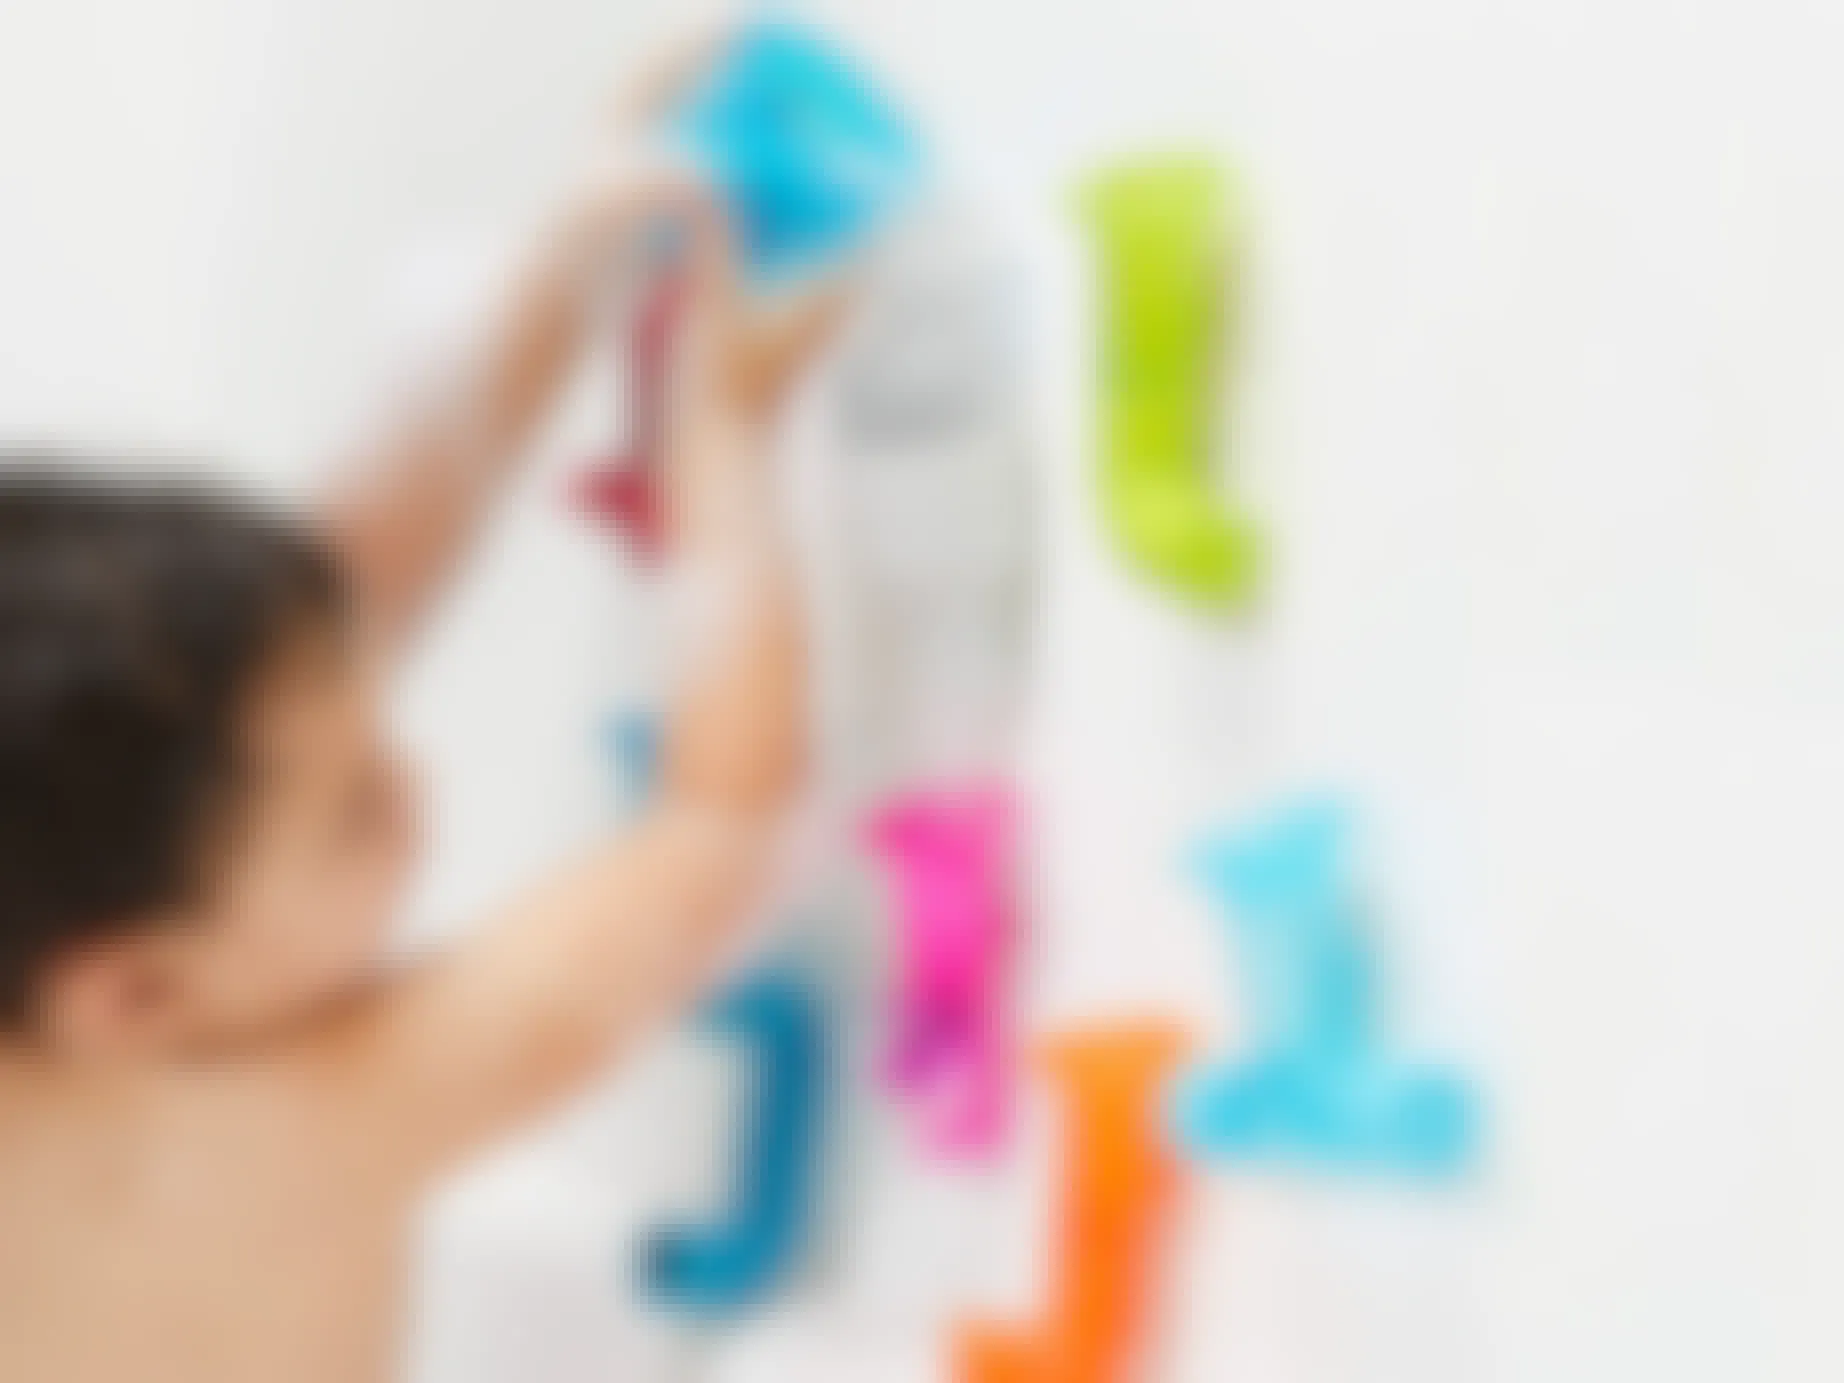 A child in a bath, pouring water into some Boon bath toys suction cupped to the wall.